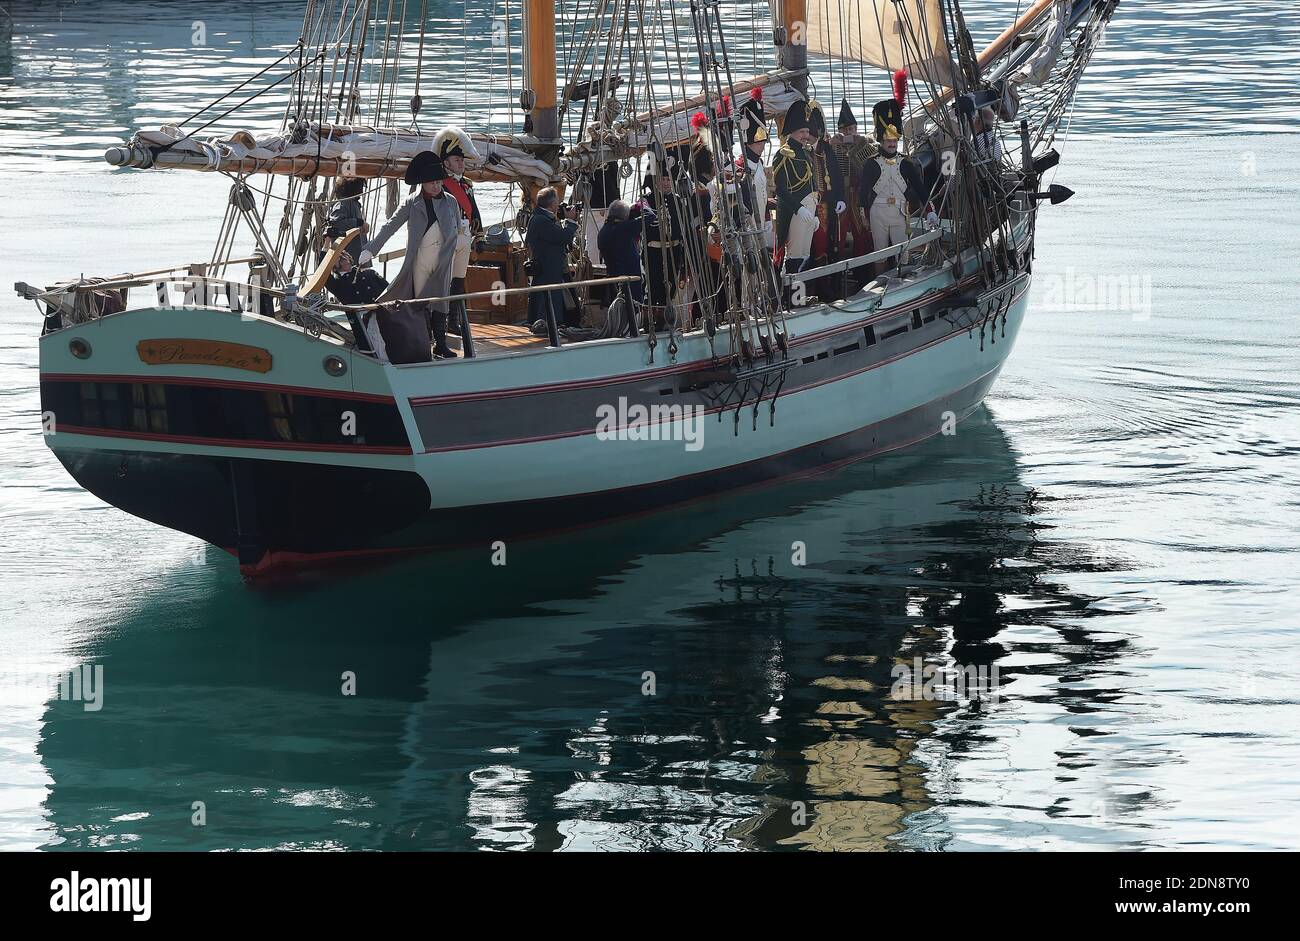 Italian enthusiast Roberto Colla, representing French Emperor Napoleon , stands on the ship 'Pandora' on February 22, 2015, leaving the harbour of Portoferraio on the island of Elba, Italy. The Italian island, where Napoleon was sent into exile in 1814, marks the 200th anniversary of the emperor leaving from Portoferraio and landing at the Golfe-Juan near Antibes,south of France, with enthusiast re-enacting the whole adventure. On February 28, 1814, British General Sir Neil Campbell realised with horror that his illustrious prisoner, Napoleon Bonaparte, had slipped away from the island of Elba Stock Photo